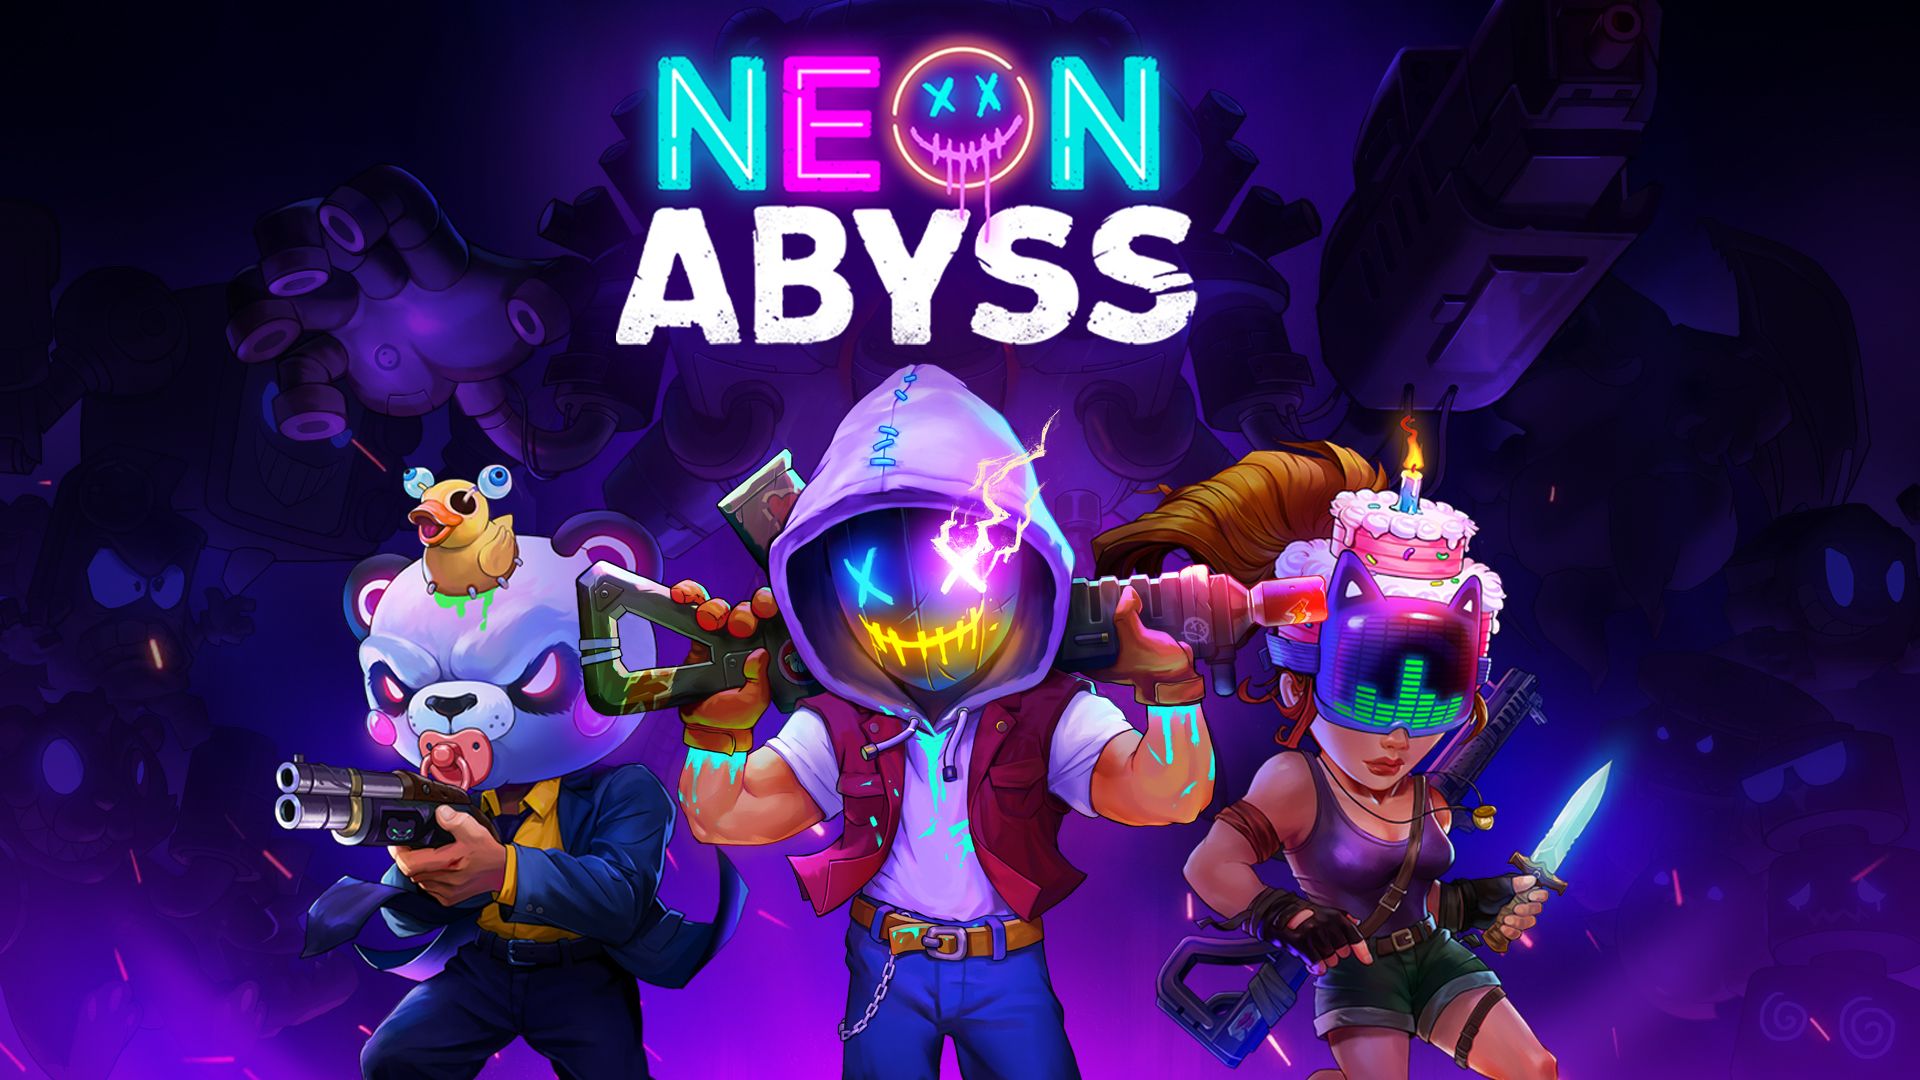 Neon Abyss Is Now Available!. Team17 Group PLC